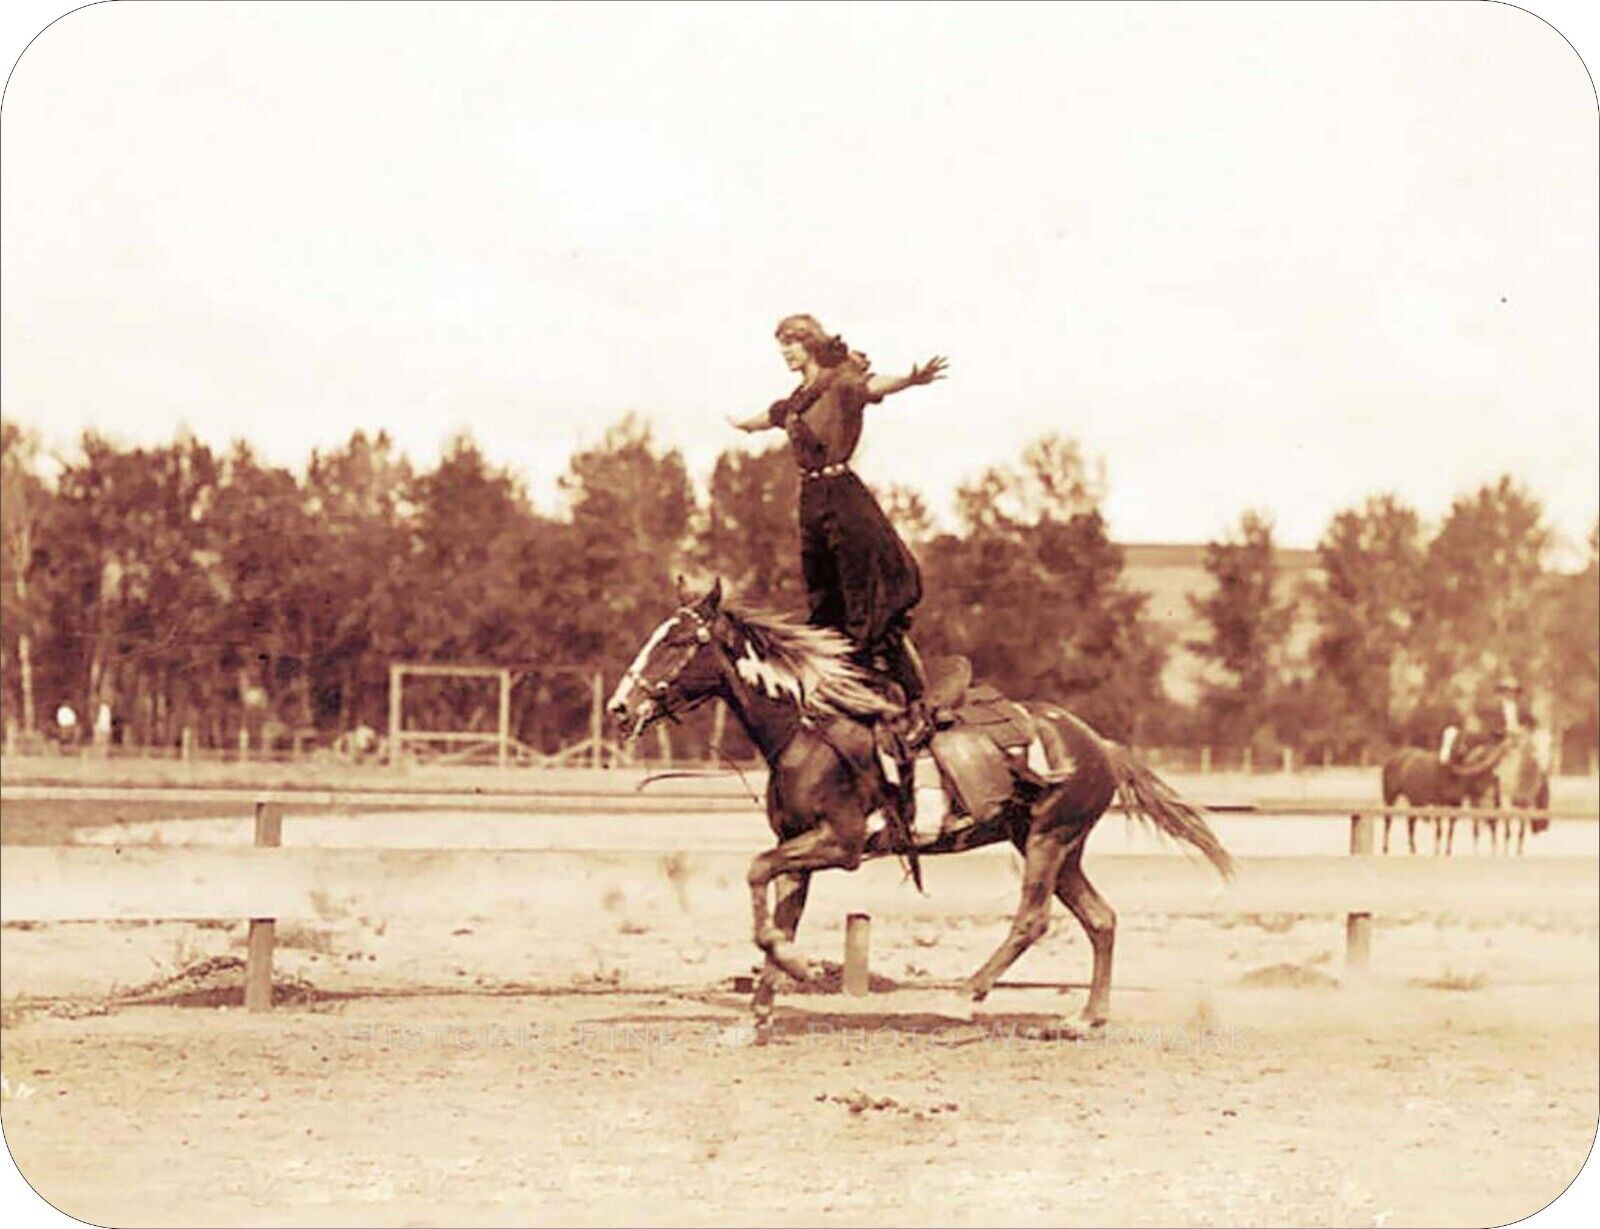 Trick Riding Cowgirl Photo On Horseback Art Standard Mouse Pad Vintage 1930s